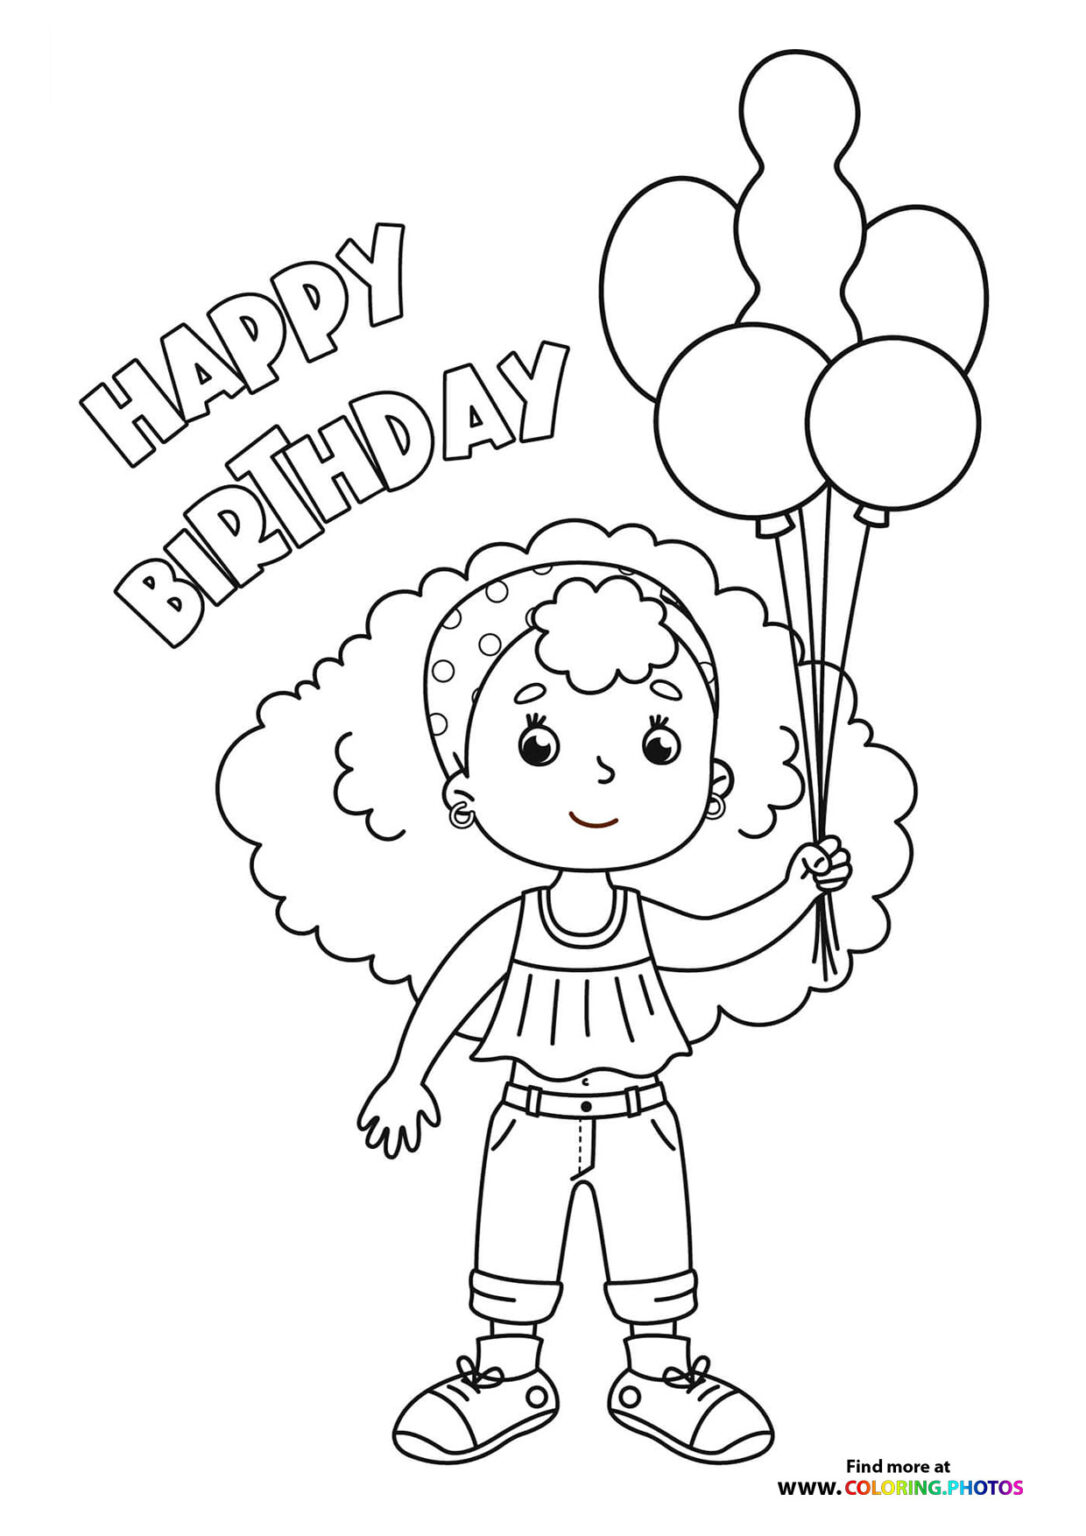 Birthday girls - Coloring Pages for kids | Free print or download